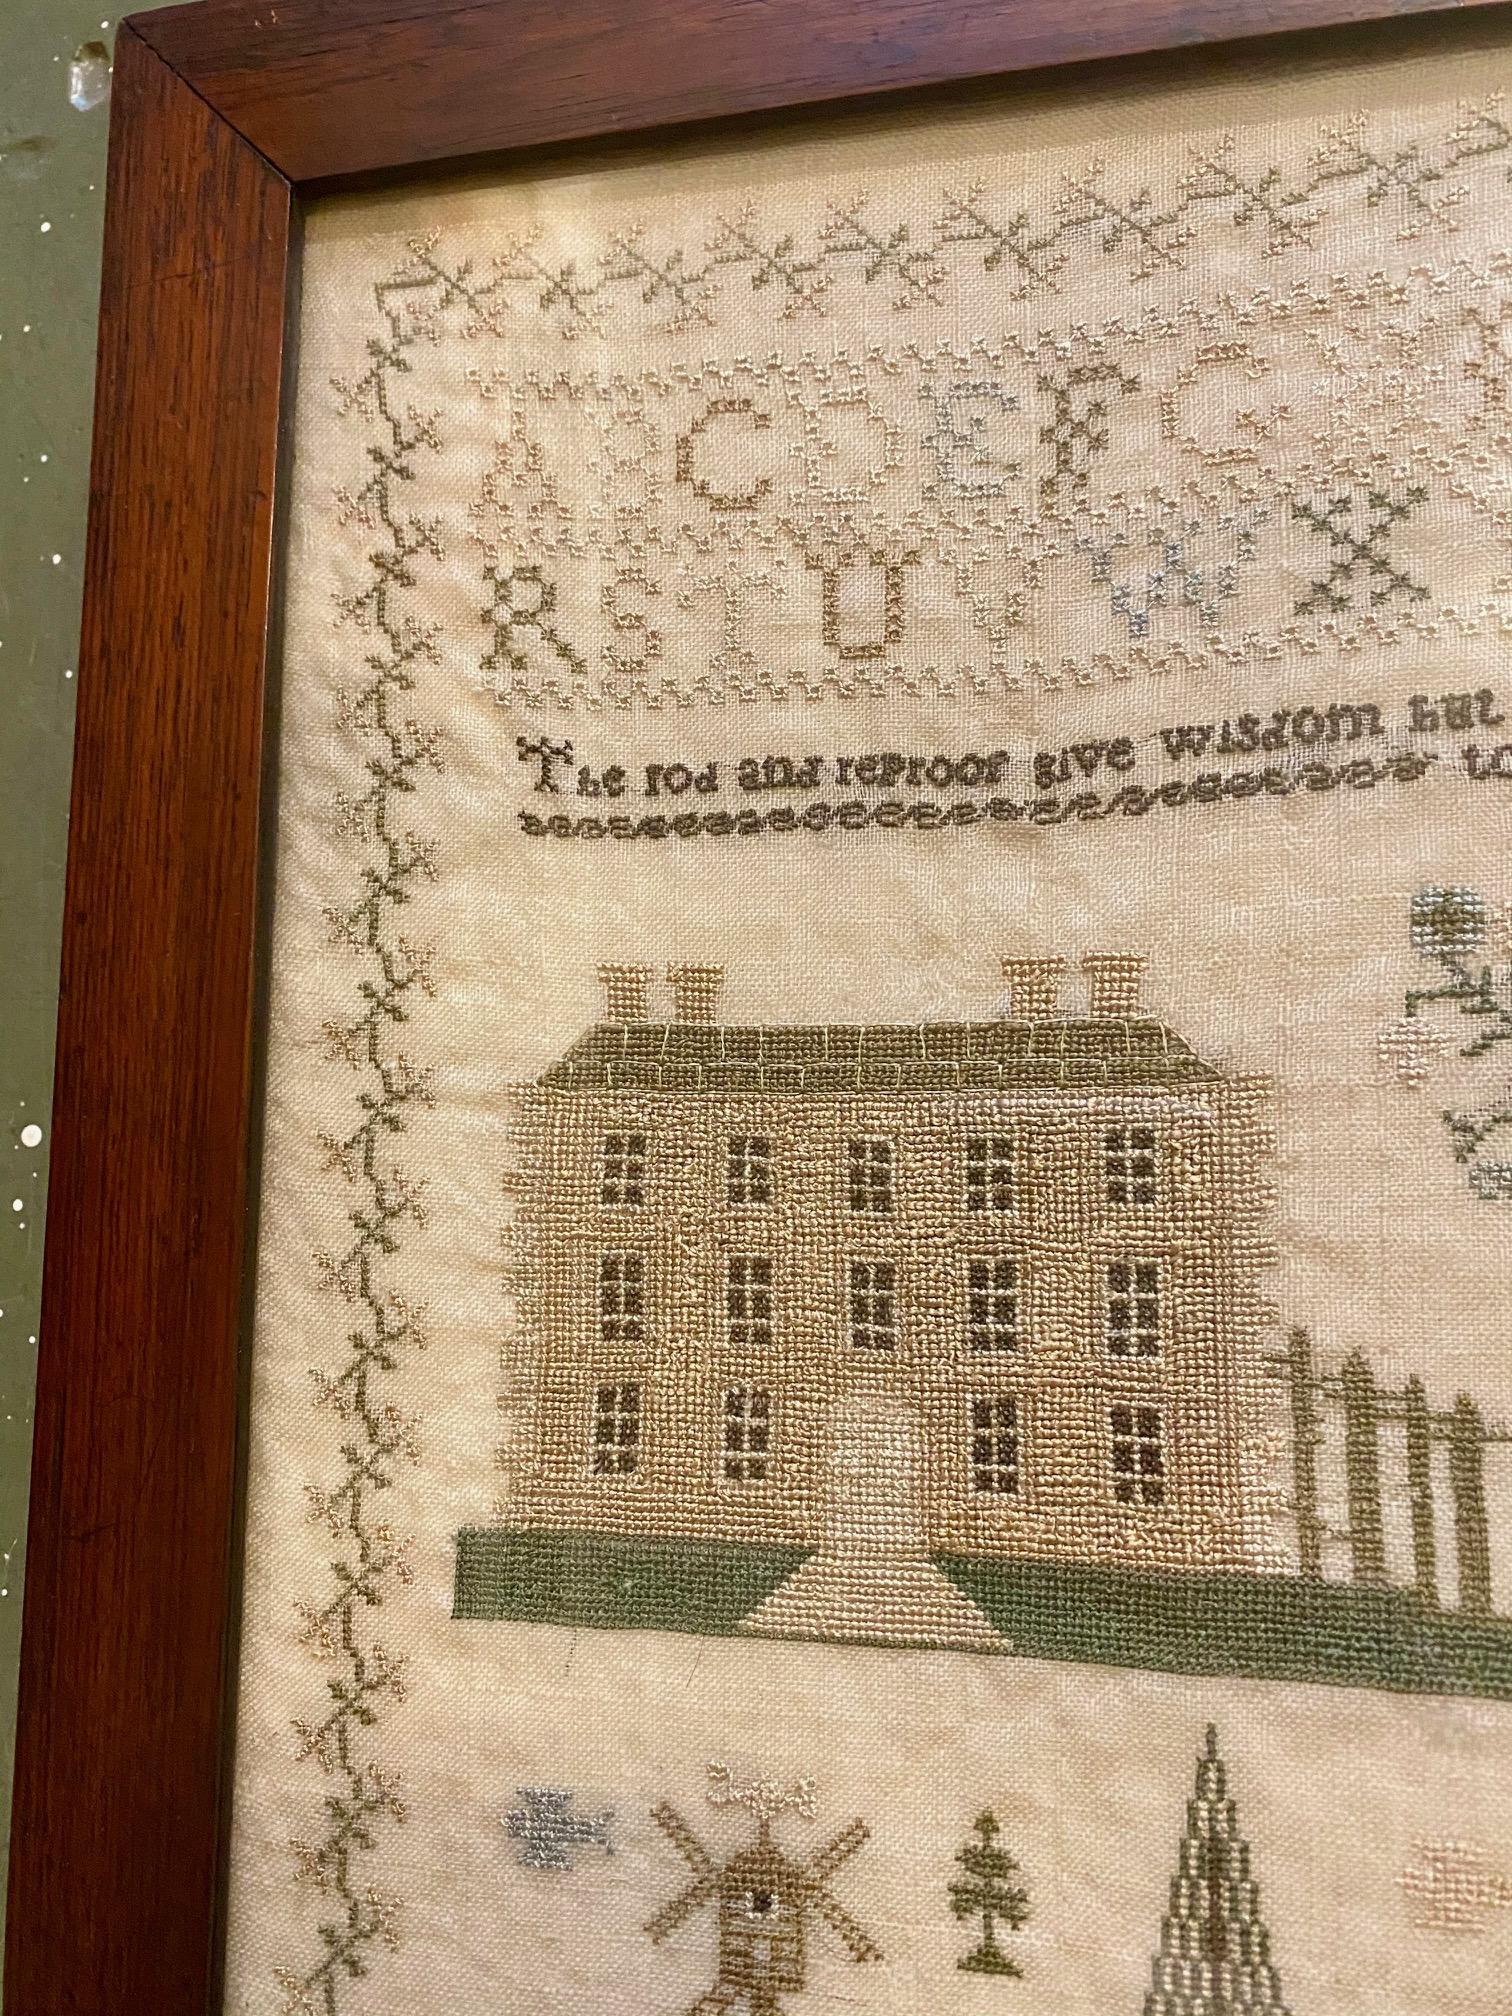 Antique American Needlework Sampler by Maria Morris, 1827, a needlework sampler on linen panel having alphabet and numerals, above a religious “rod and reproof” verse, over a house and garden with man and dog, over an array of trees, windmills and